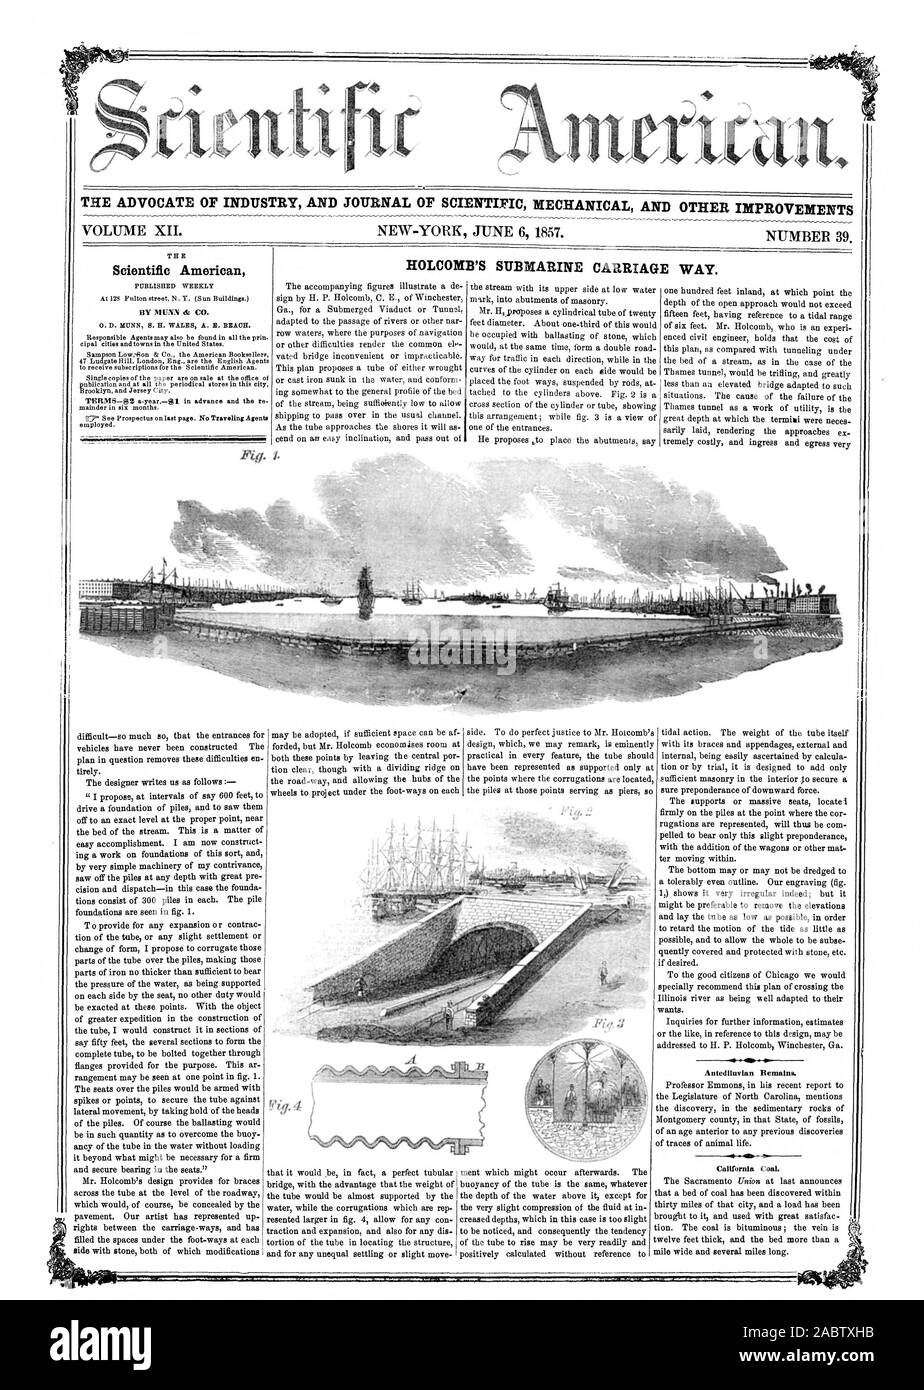 THE ADVOCATE OF INDUSTRY AND JOURNAL OF SCIENTIFIC MECHANICAL AND OTHER IMPROVEMENTS SUBMARINE CARRIAGE WAY Scientific American HOLCOMB'S I., 1857-06-06 Stock Photo